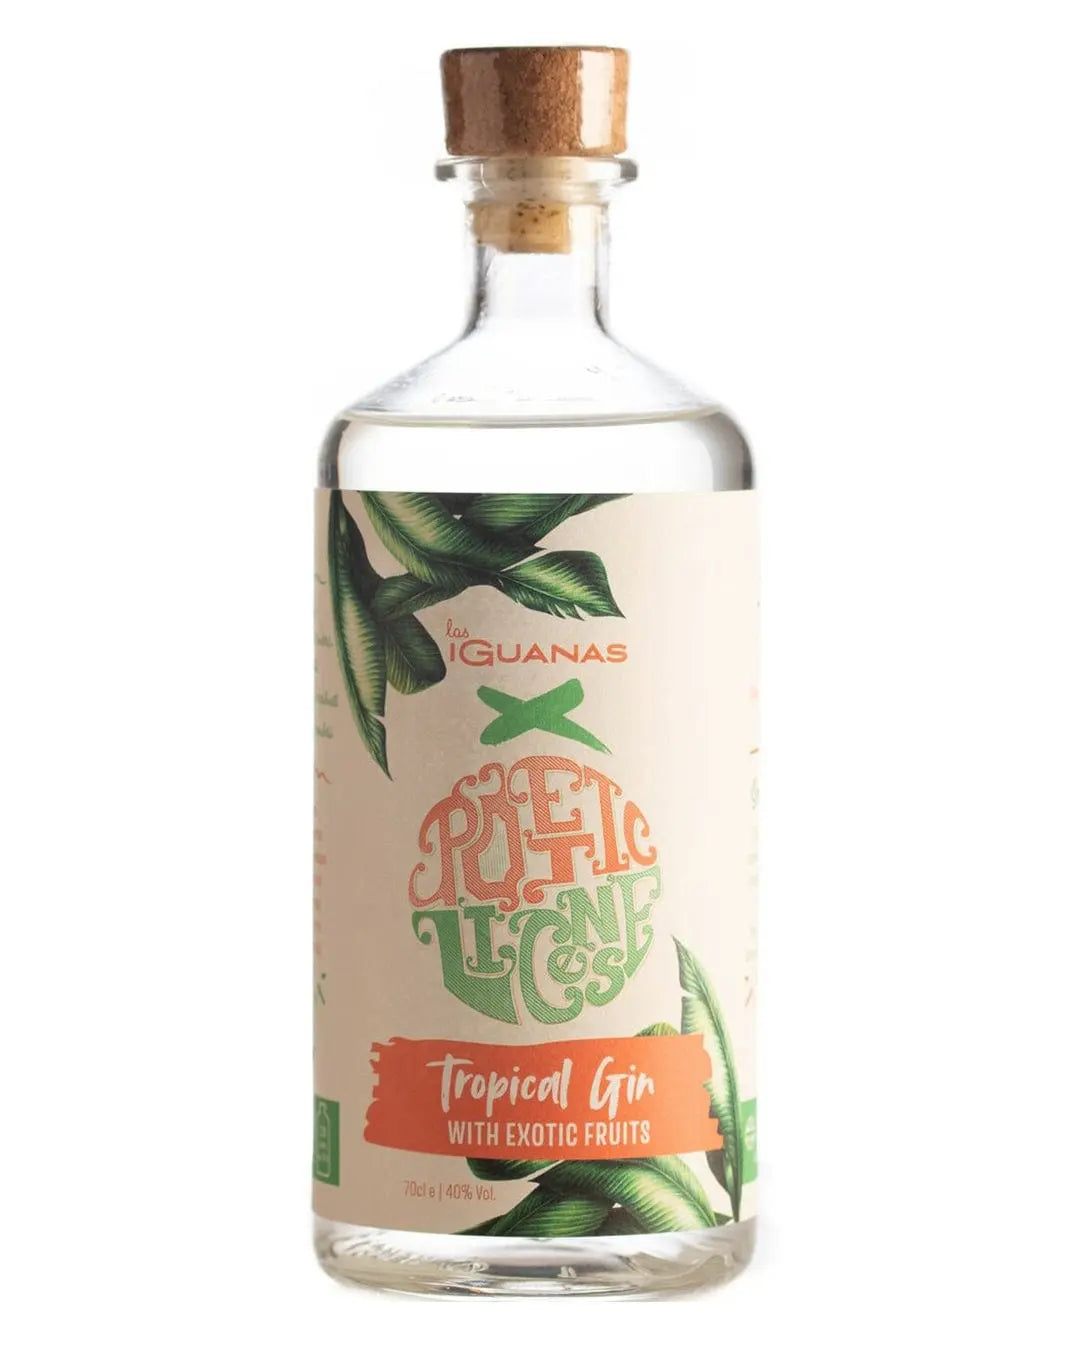 Poetic License x Las Iguanas Tropical Gin, 70 cl Gin